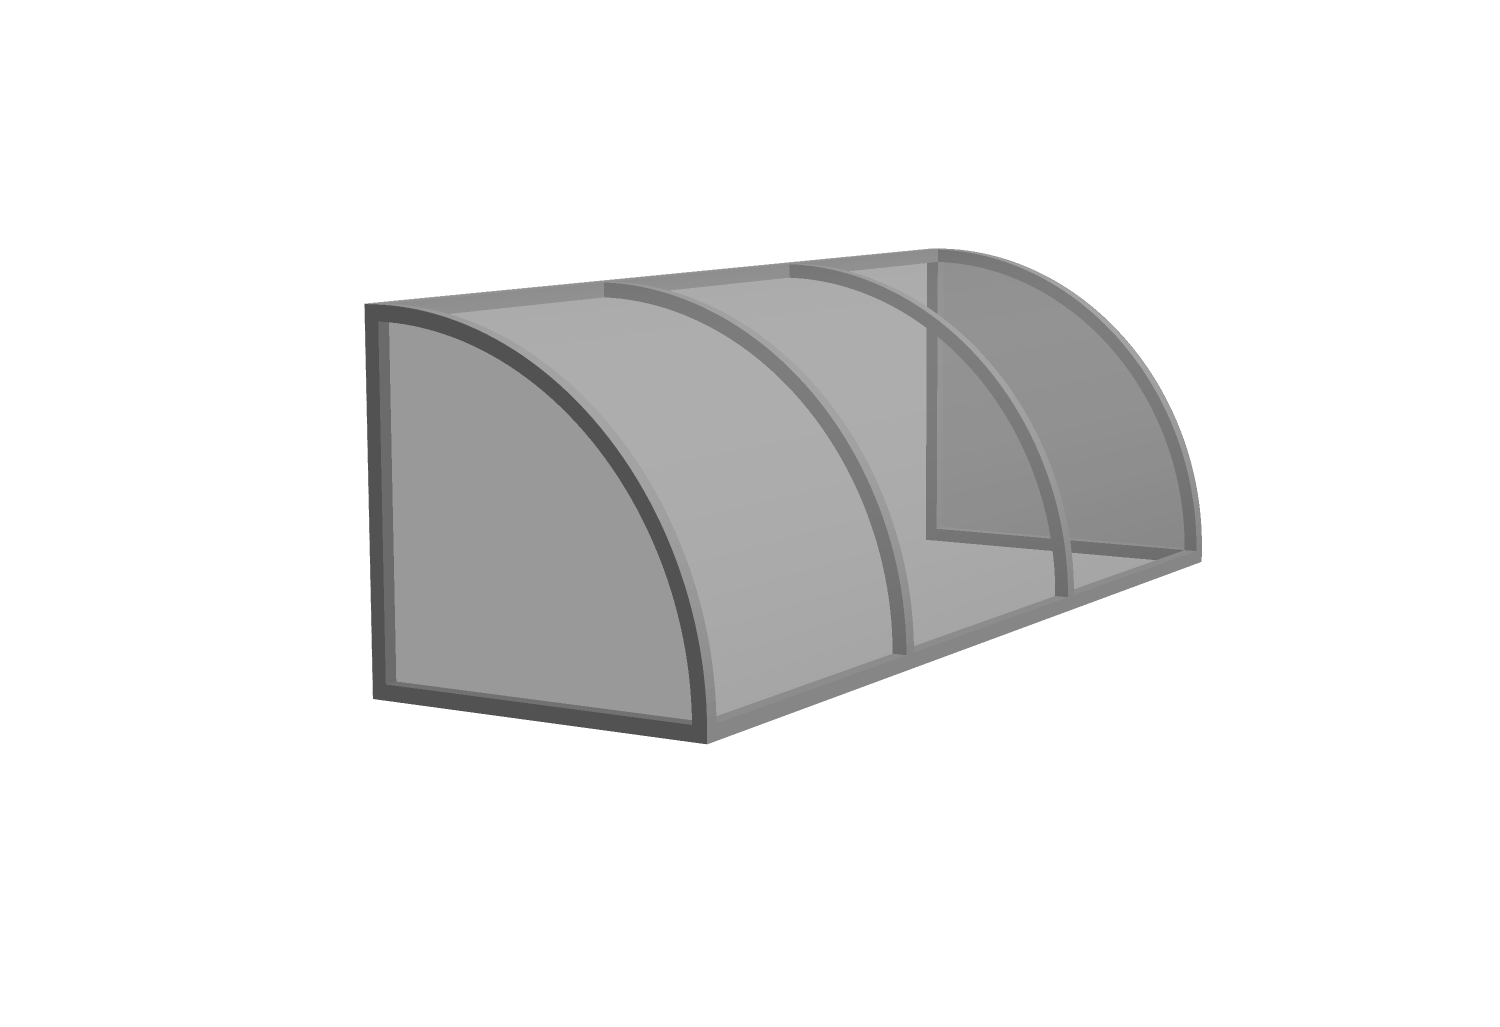 3D model of a convex awning